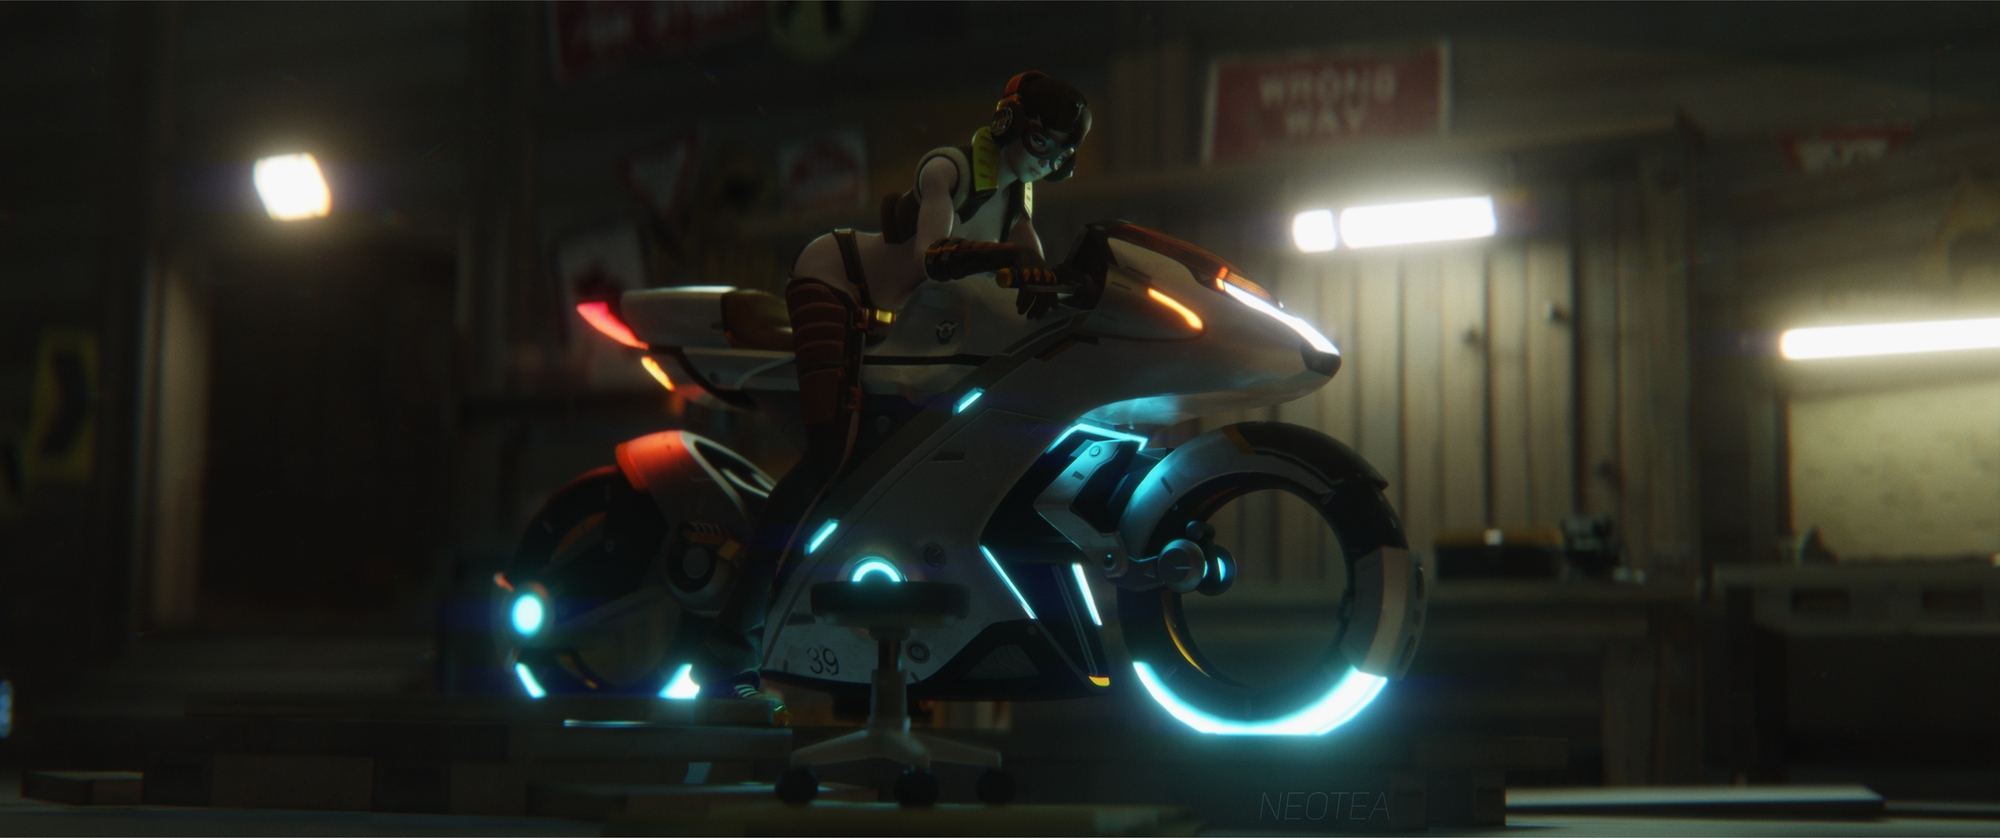 dva lighting practice D.va Overwatch 1girl Pose Tease Motorcycle Pinup Small Ass Small Boobs Small Breasts